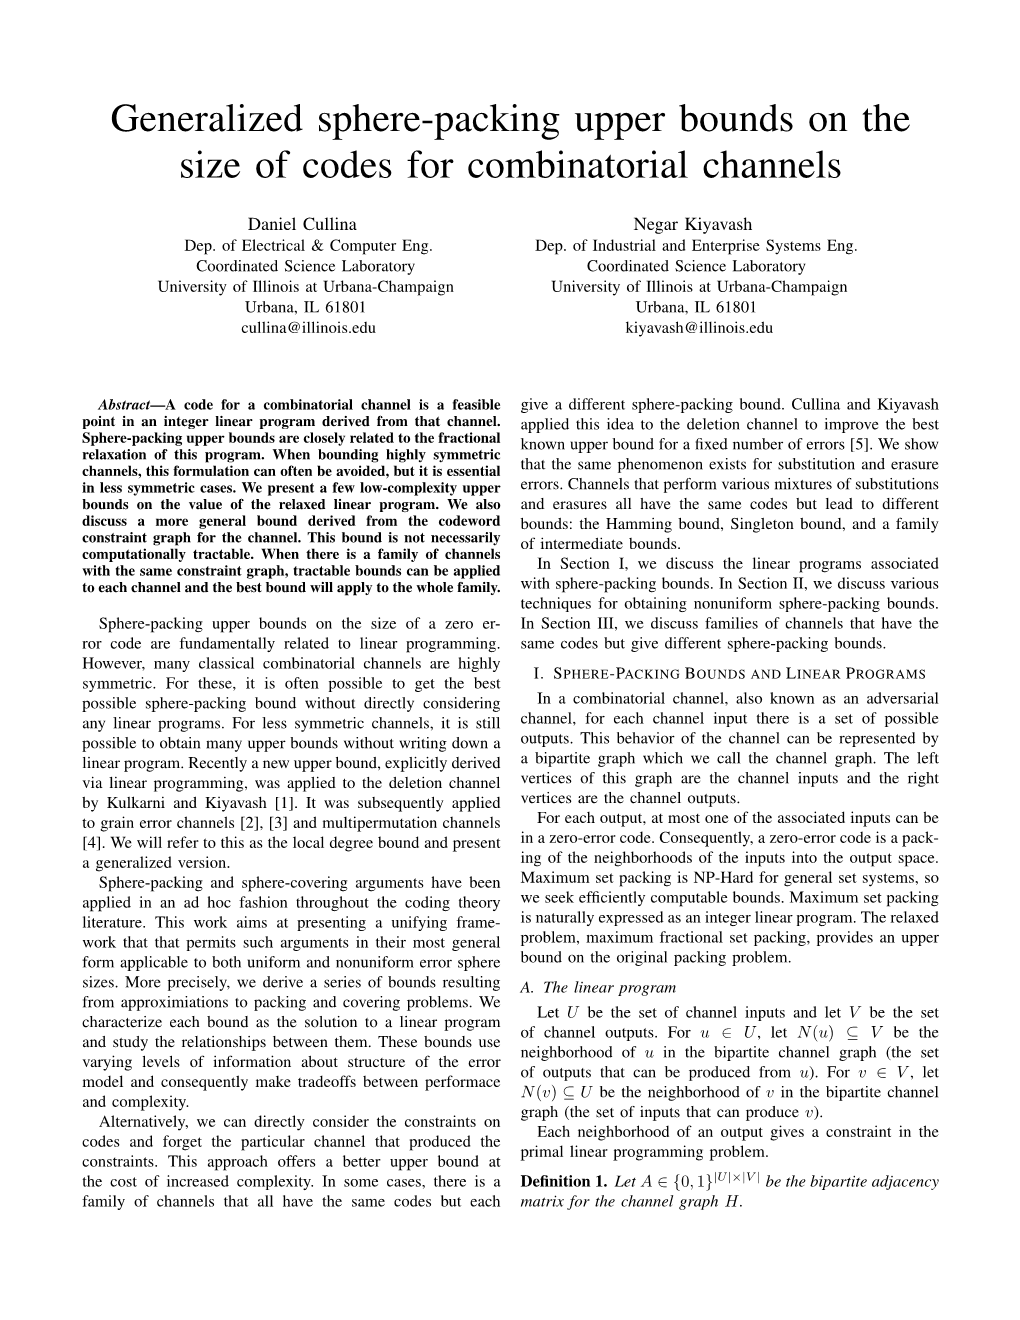 Generalized Sphere-Packing Upper Bounds on the Size of Codes for Combinatorial Channels